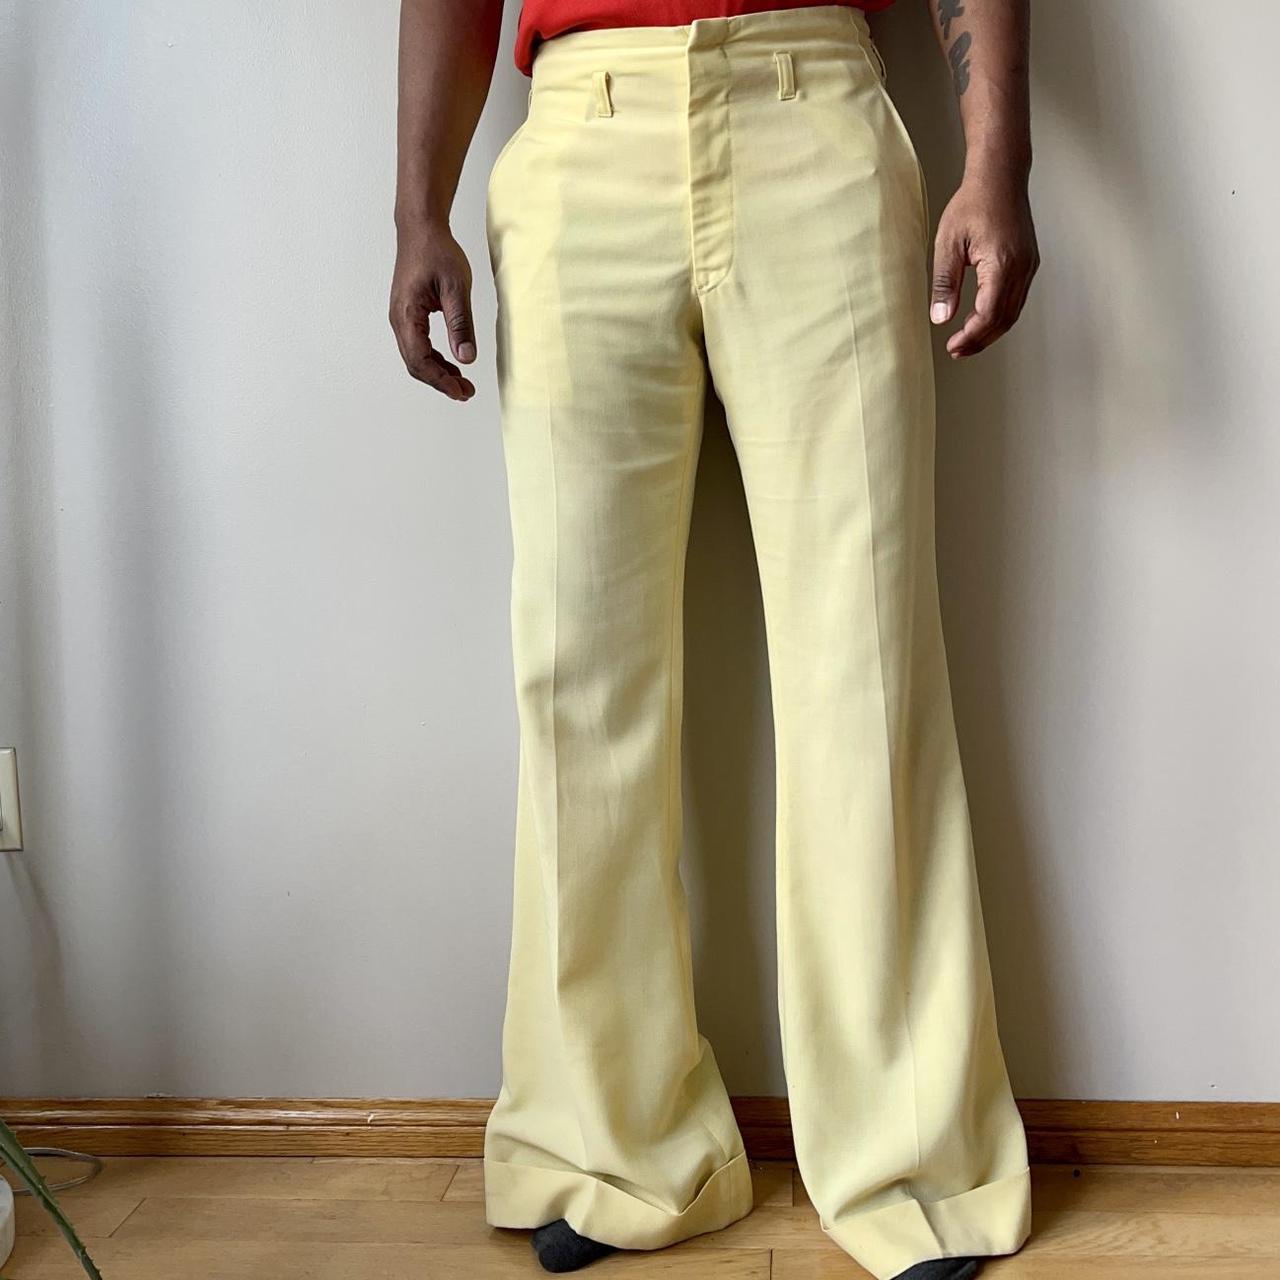 Canary Yellow Rayon Blend Drop Loop Bellbottom Pants